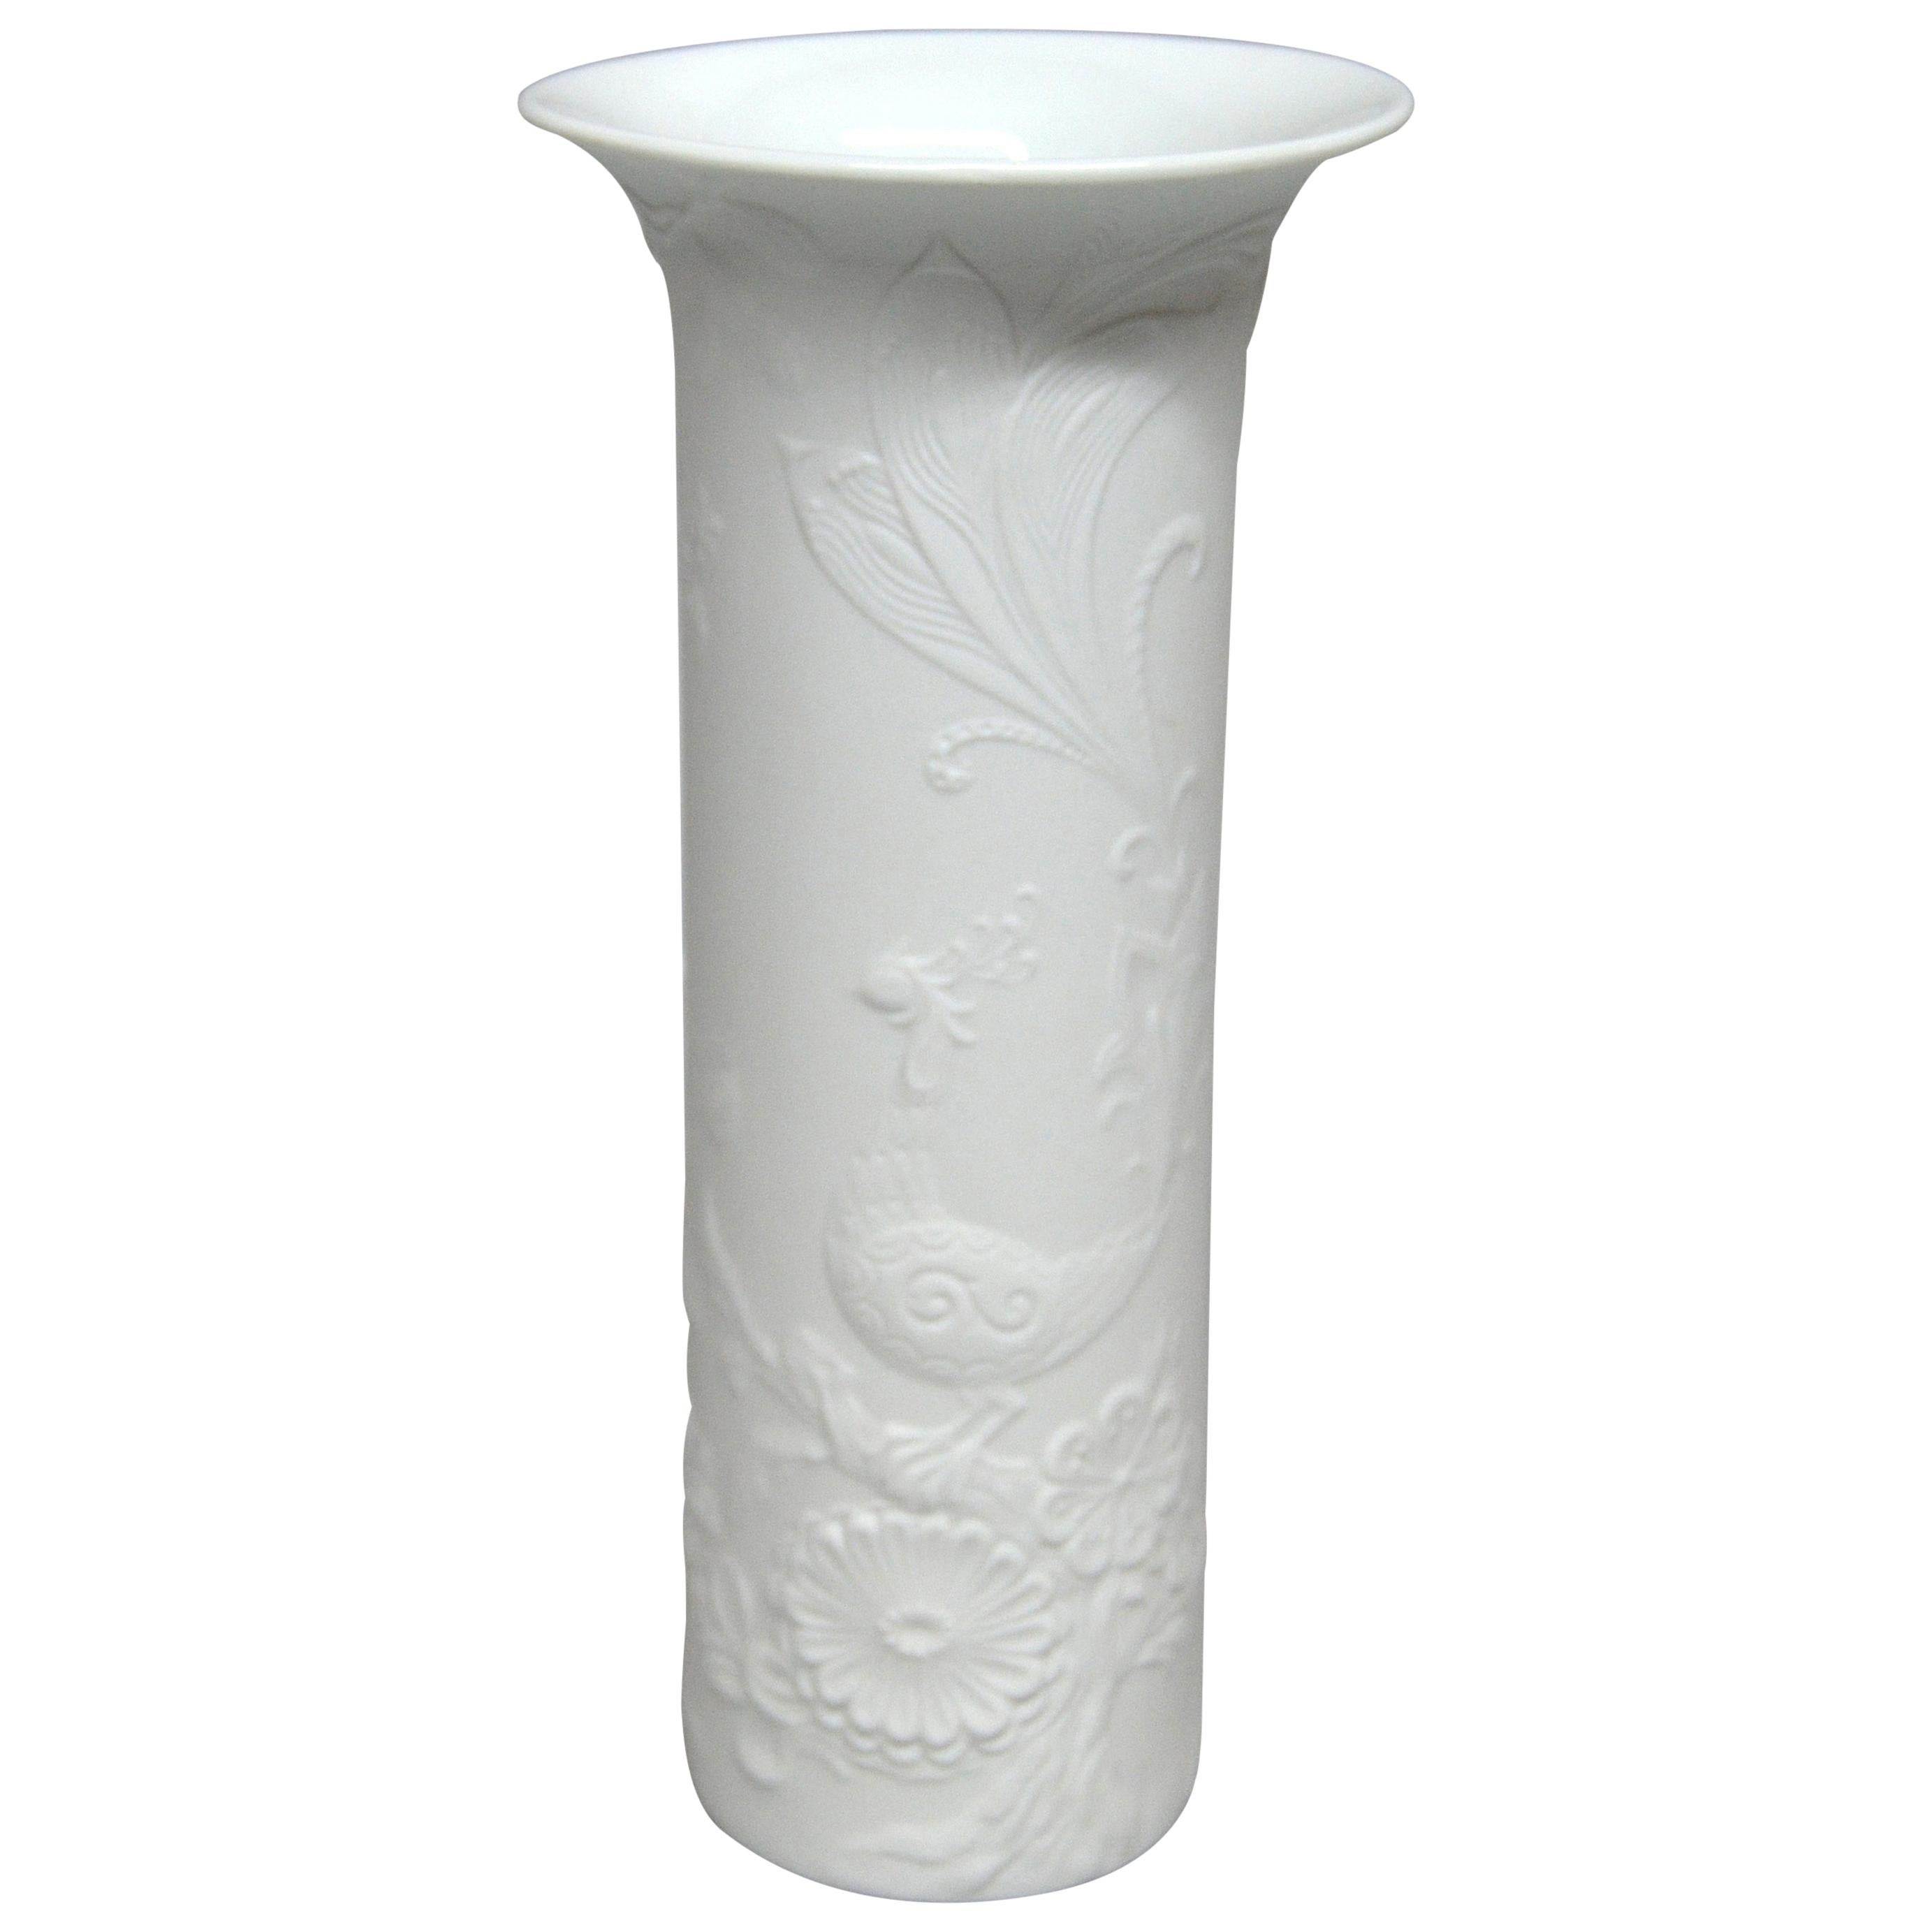 Original Kaiser White Bisque Ceramic Flower Vase, Made in West-Germany,  1960s For Sale at 1stDibs